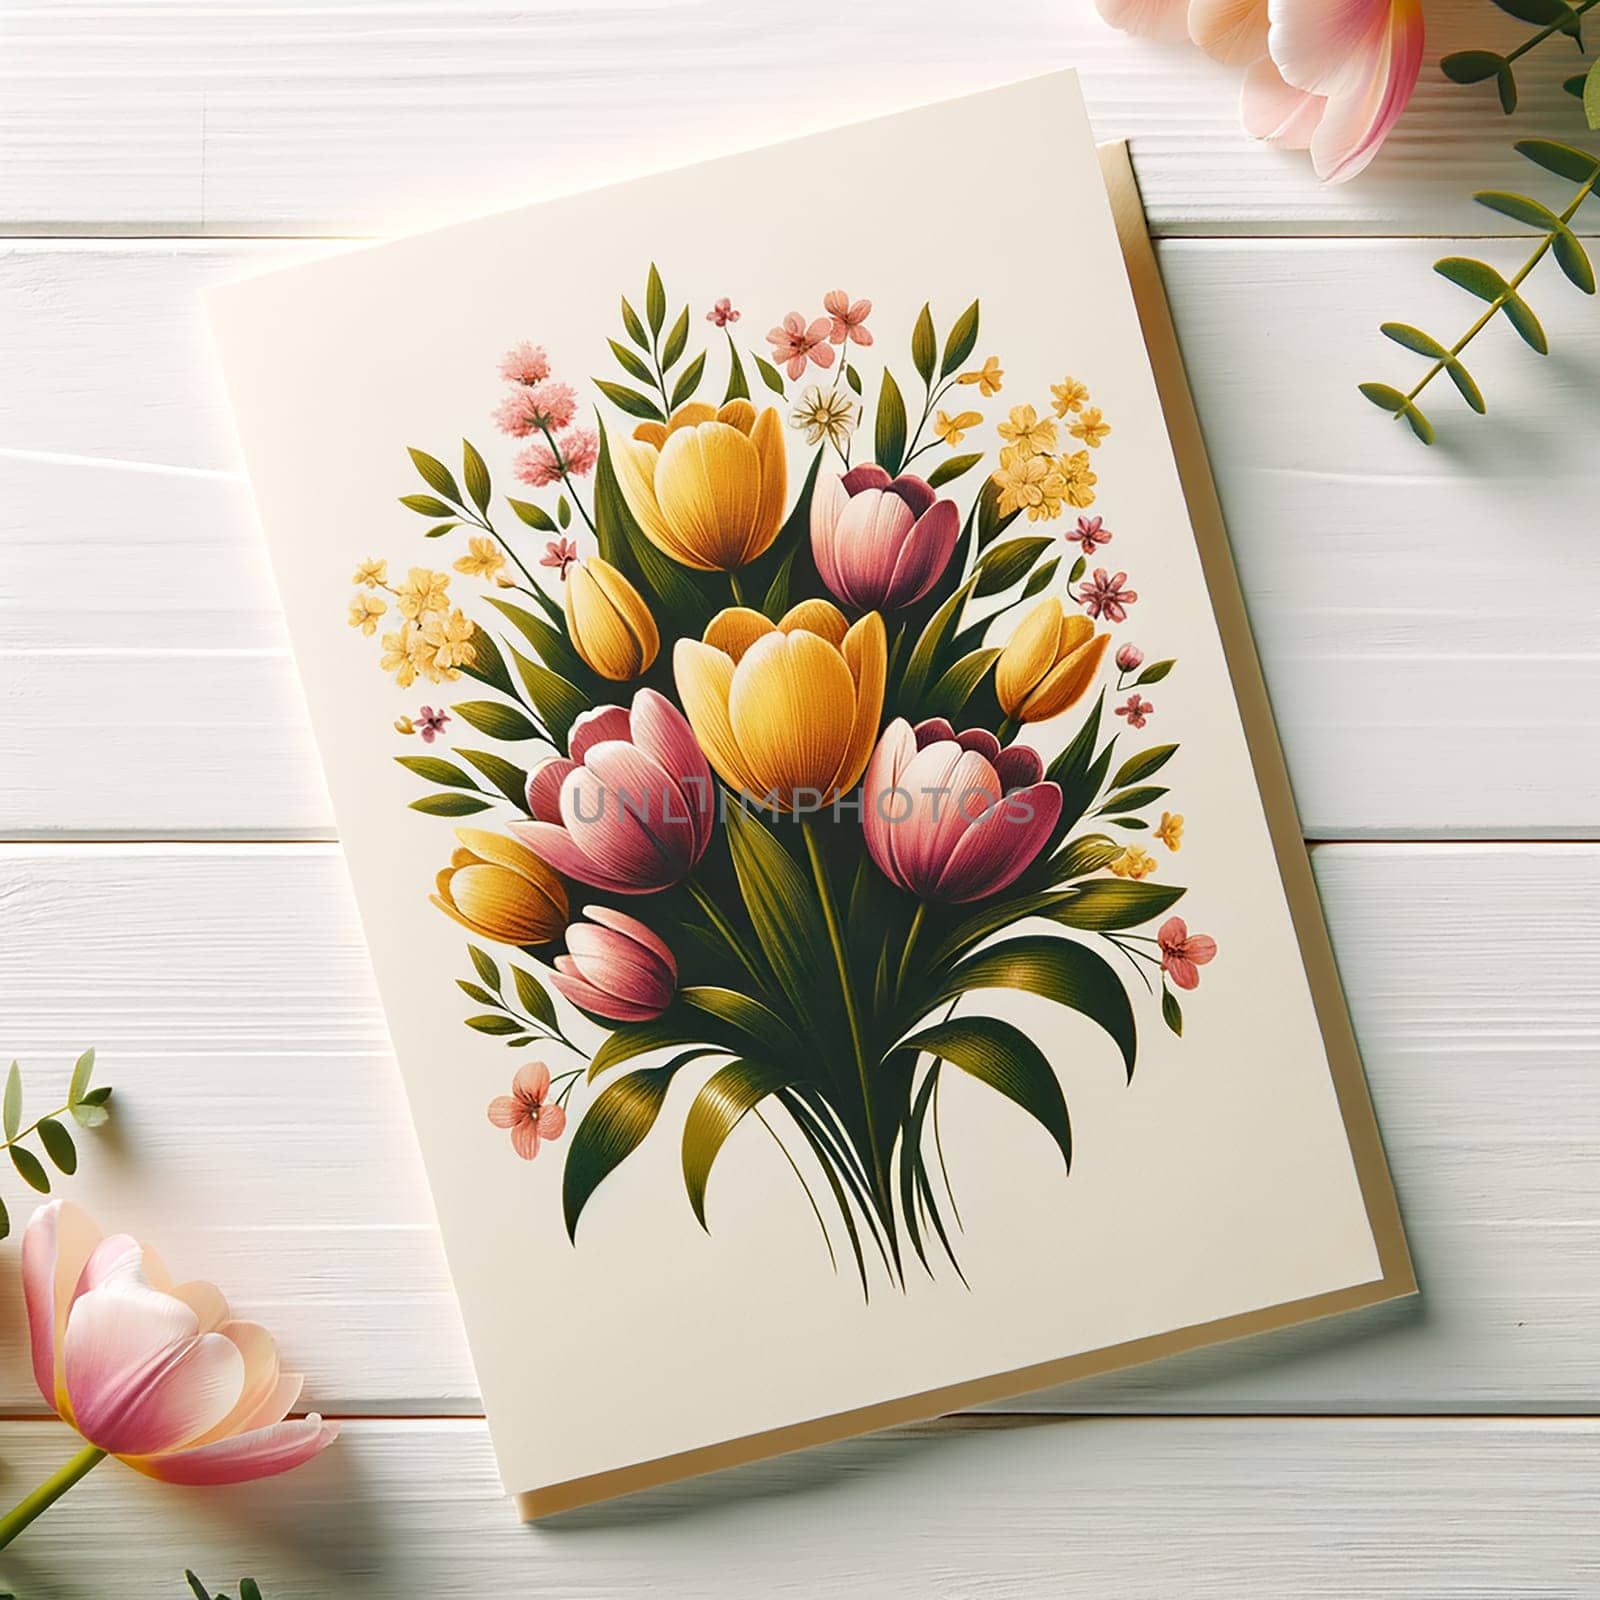 Springtime Affection: Mothers Day Card with Peonies by Petrichor